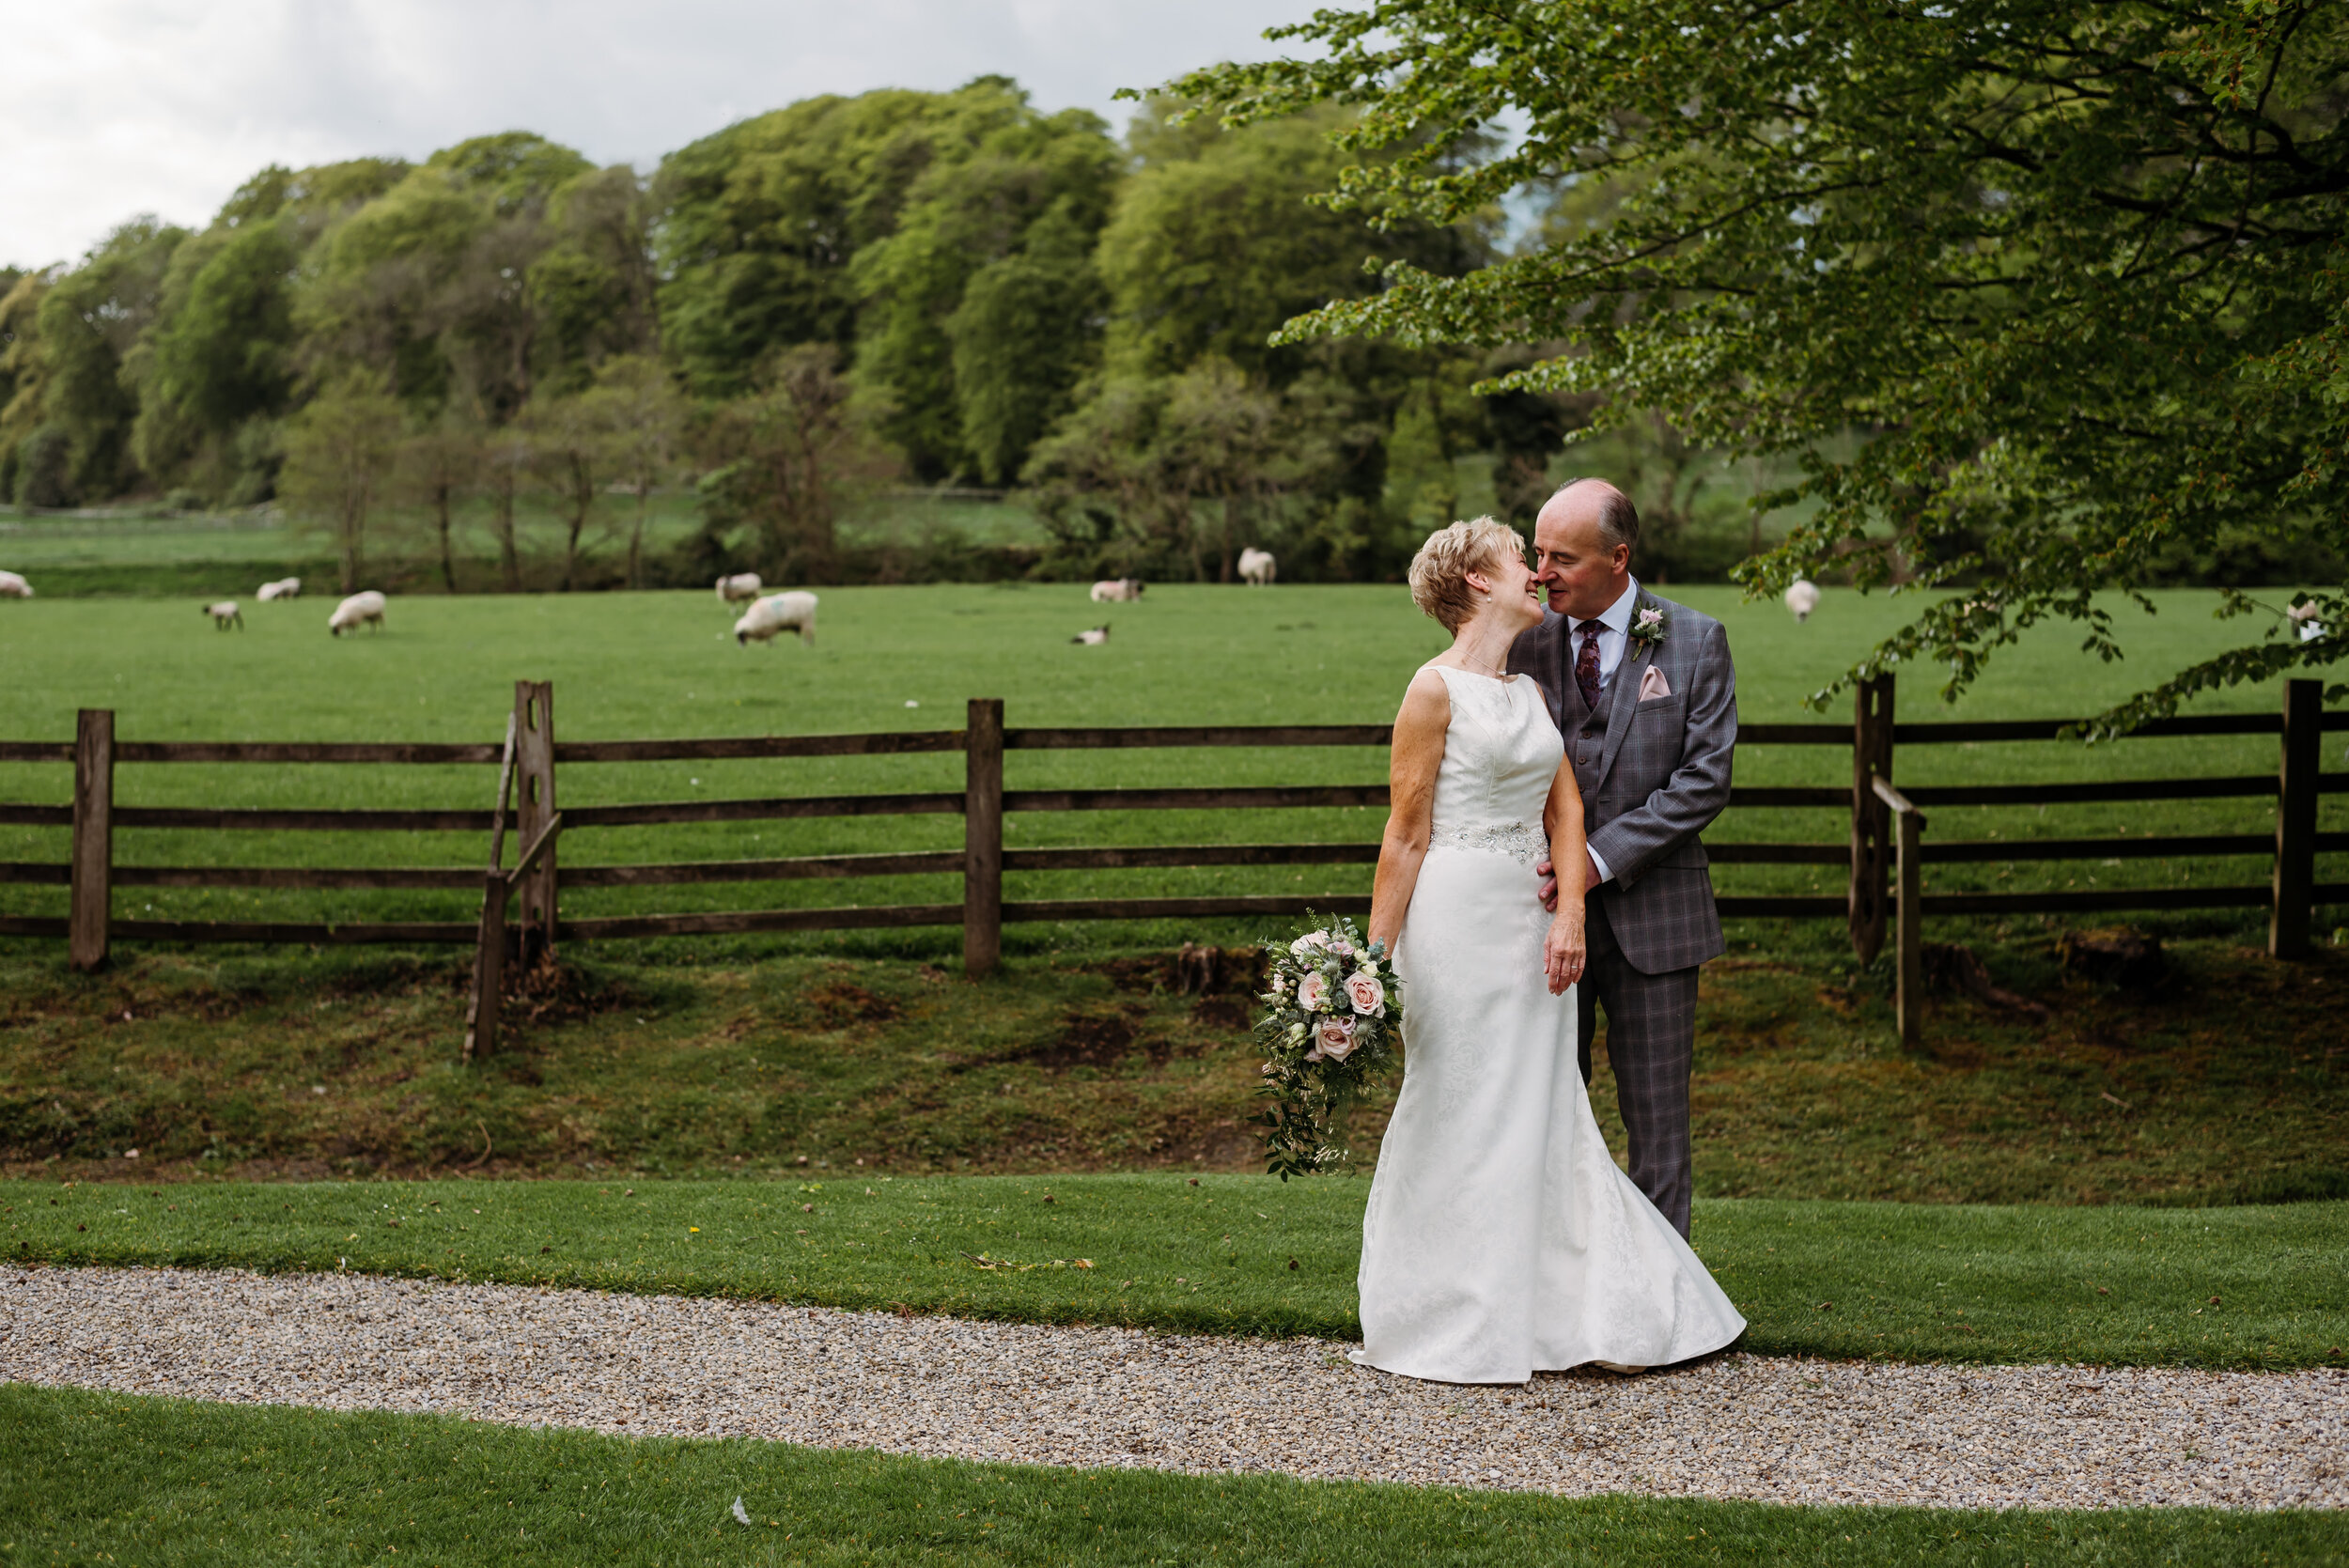 Gorgeous bride and groom in the garden at Mitton Hall